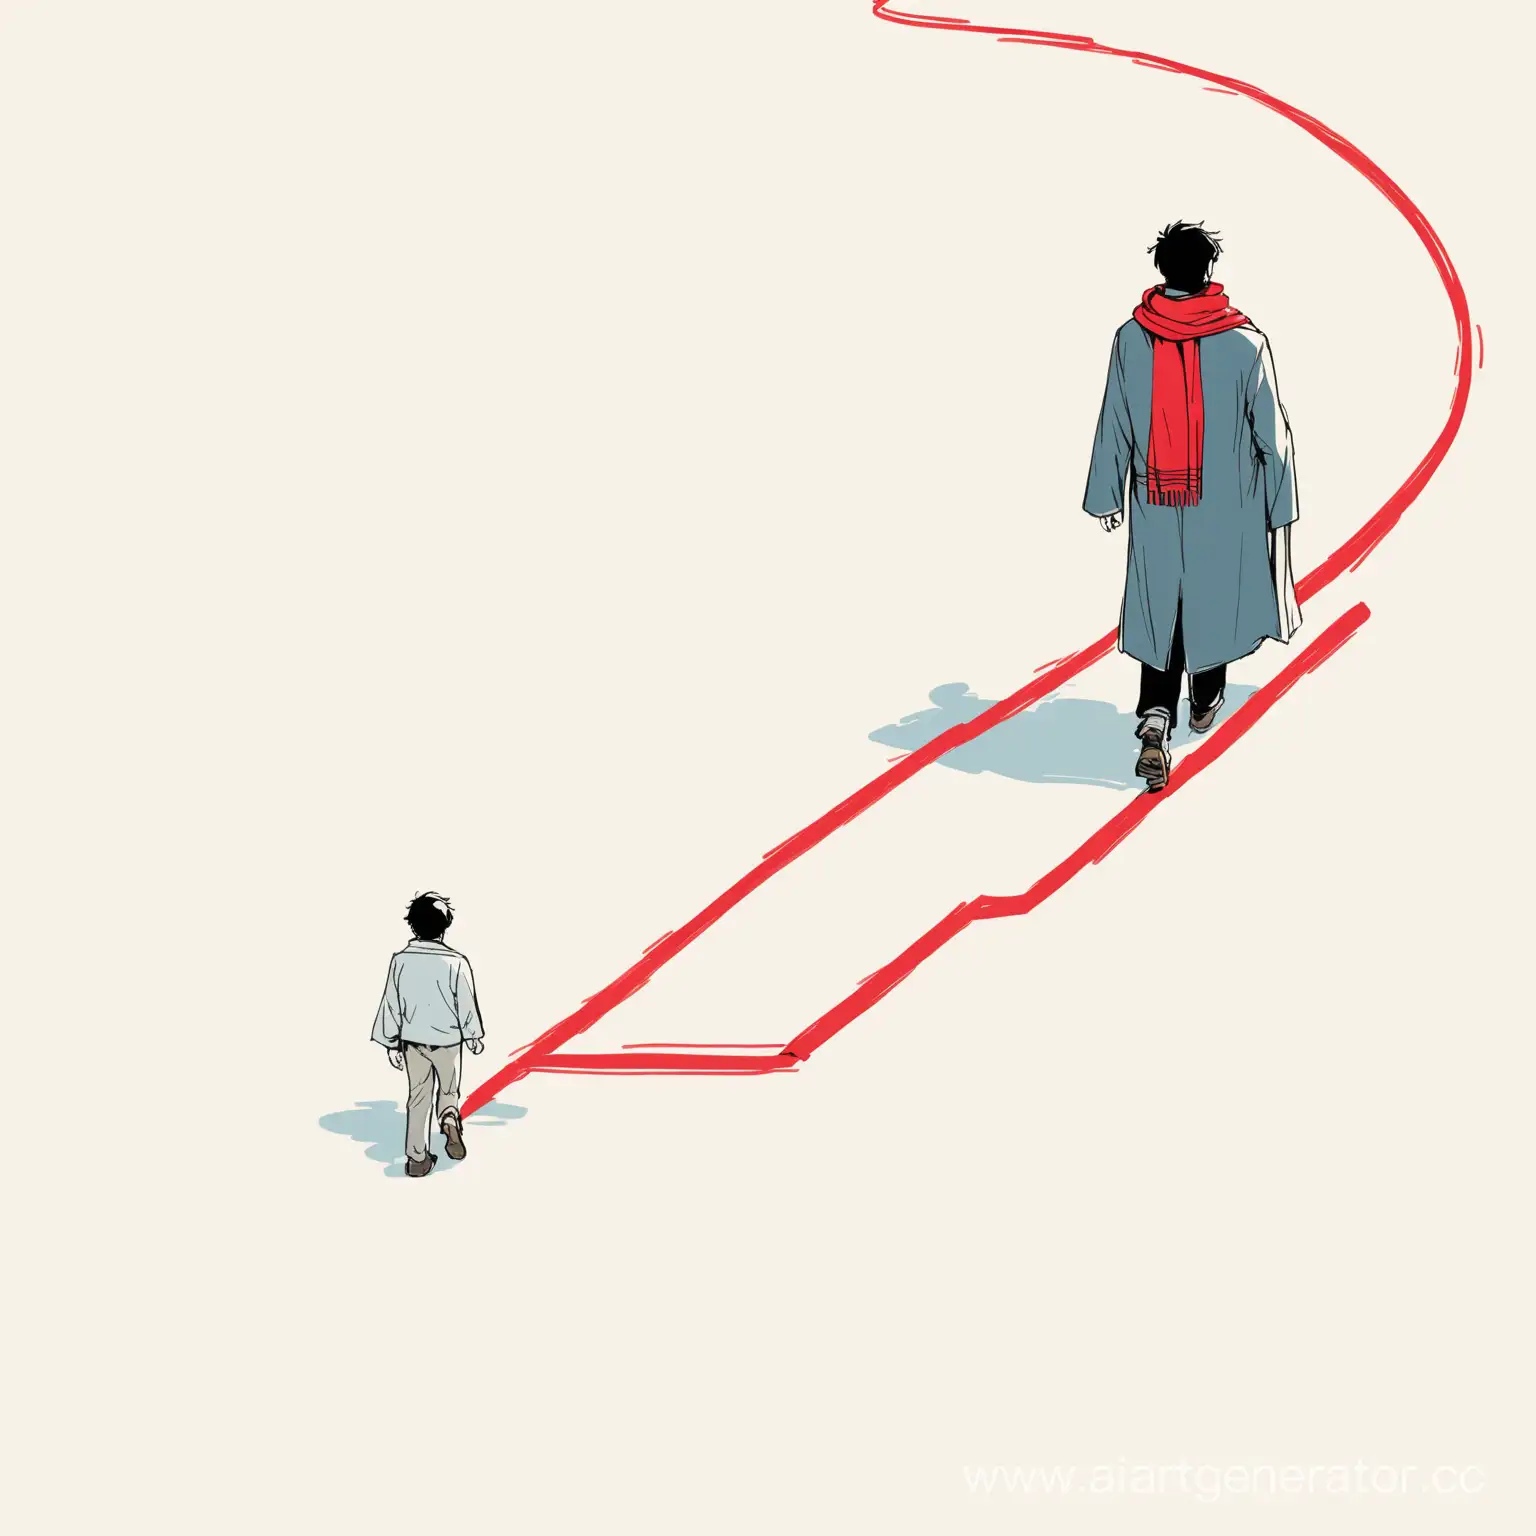 the character is wandering, the guy is drawn, he follows the red line, he has a scarf